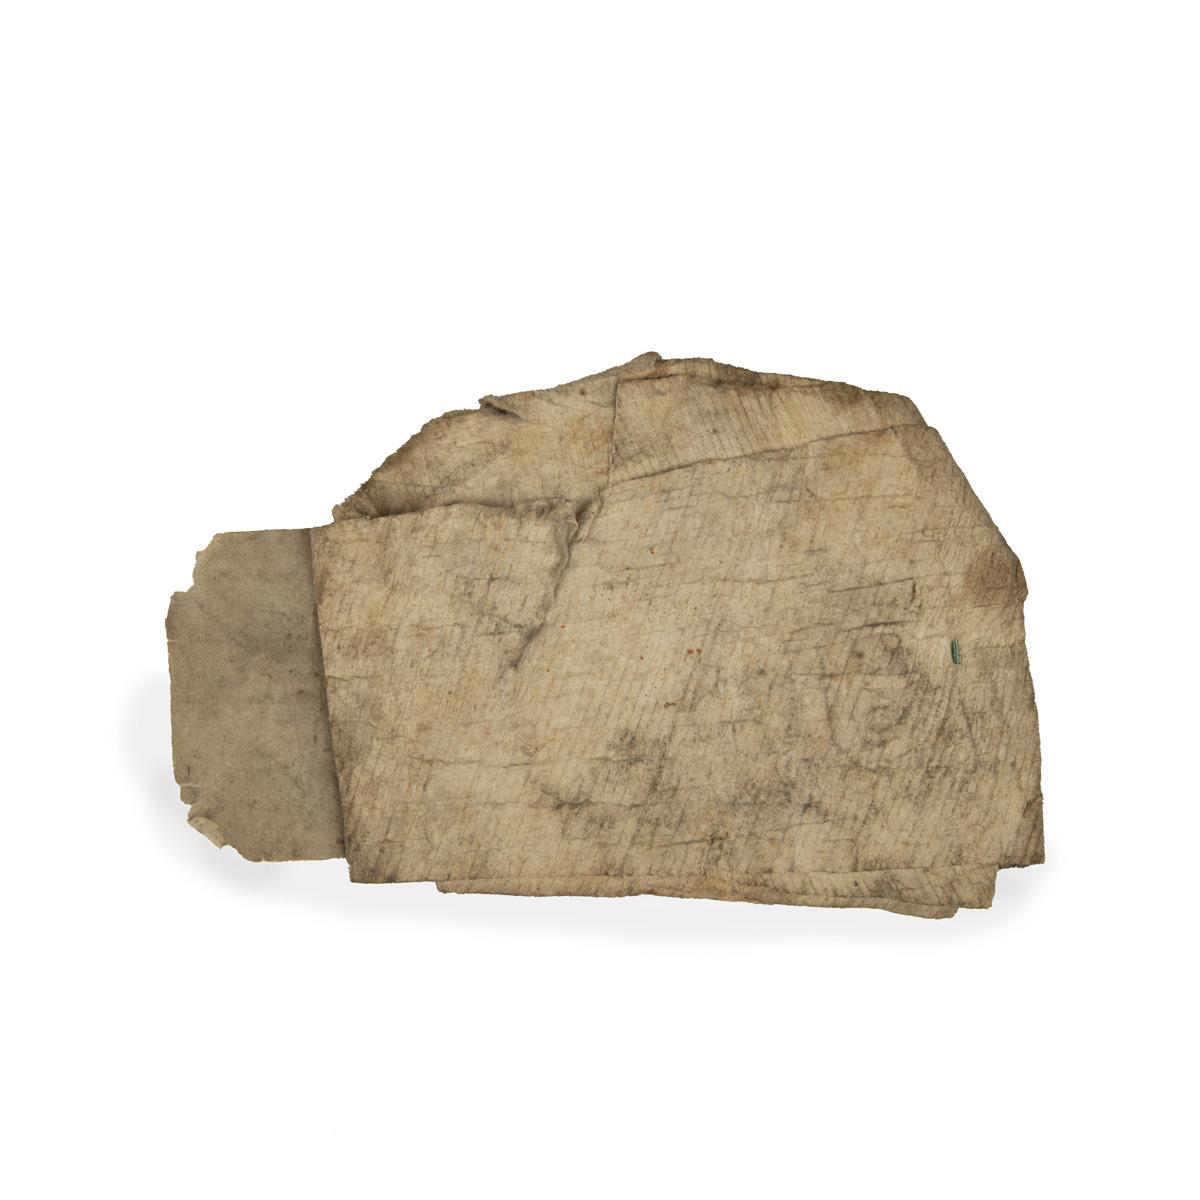 Relic from the family of Bounty Mutineer John Adams: An exceptionally rare documented piece of Bark Cloth from the Pitcairn Islands